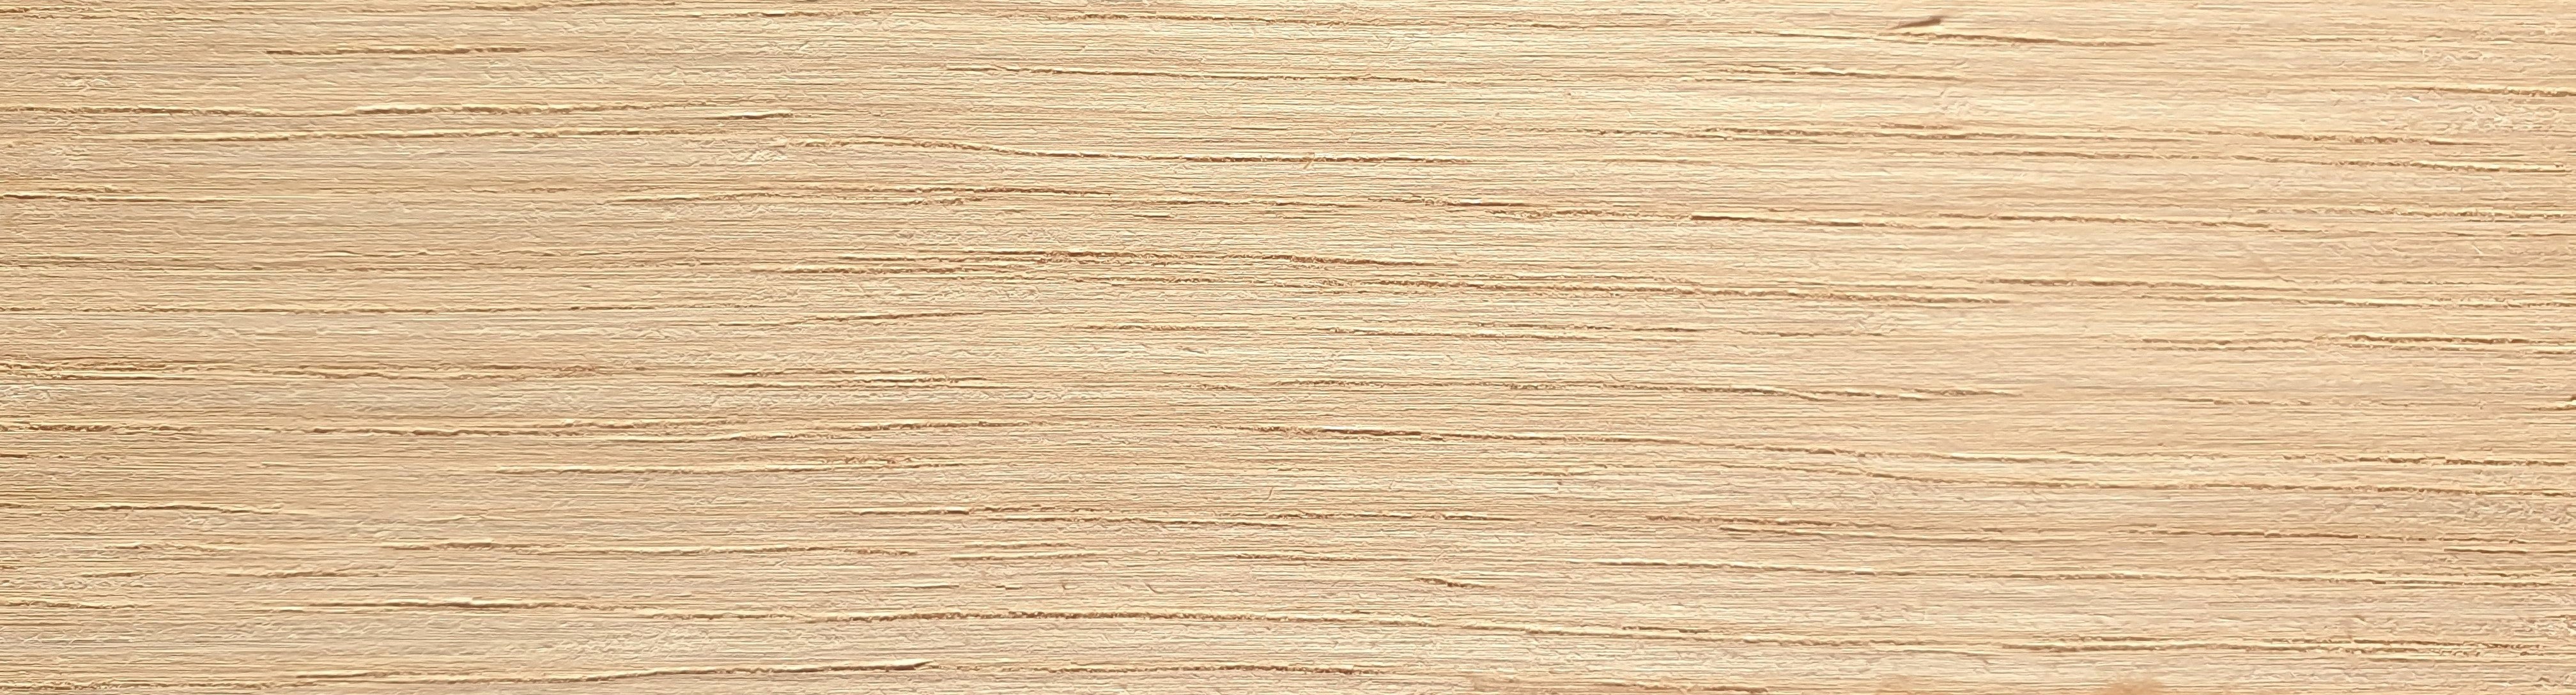 AMERICAN WHITE OAK Pre-glued Iron On Real Wood Edging 40mm Wide